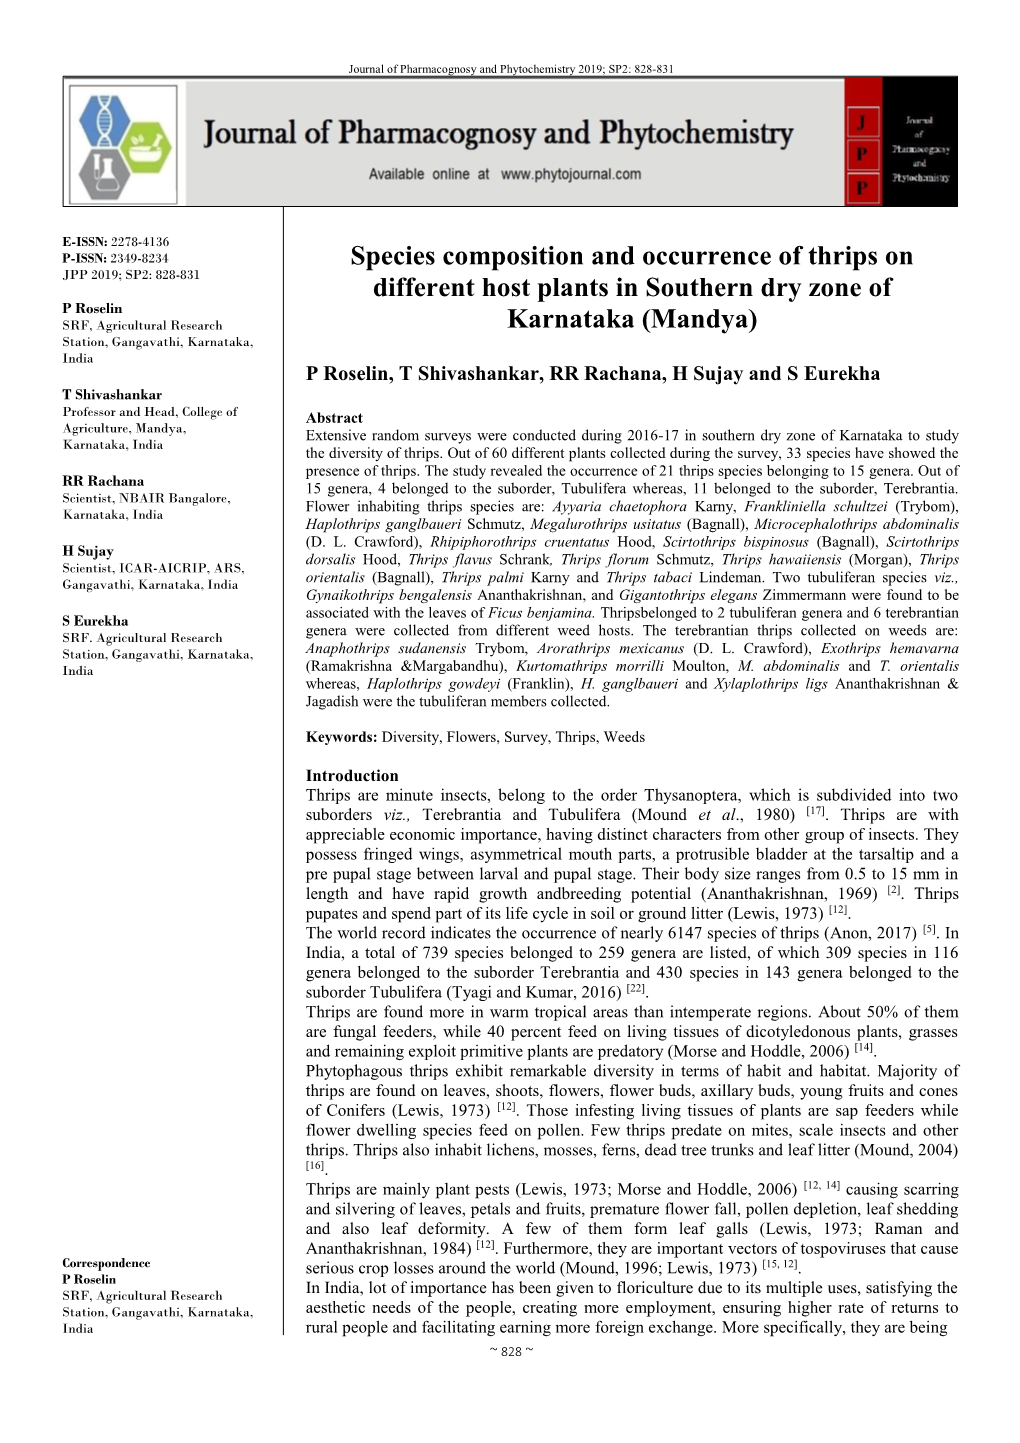 Species Composition and Occurrence of Thrips on Different Host Plants In